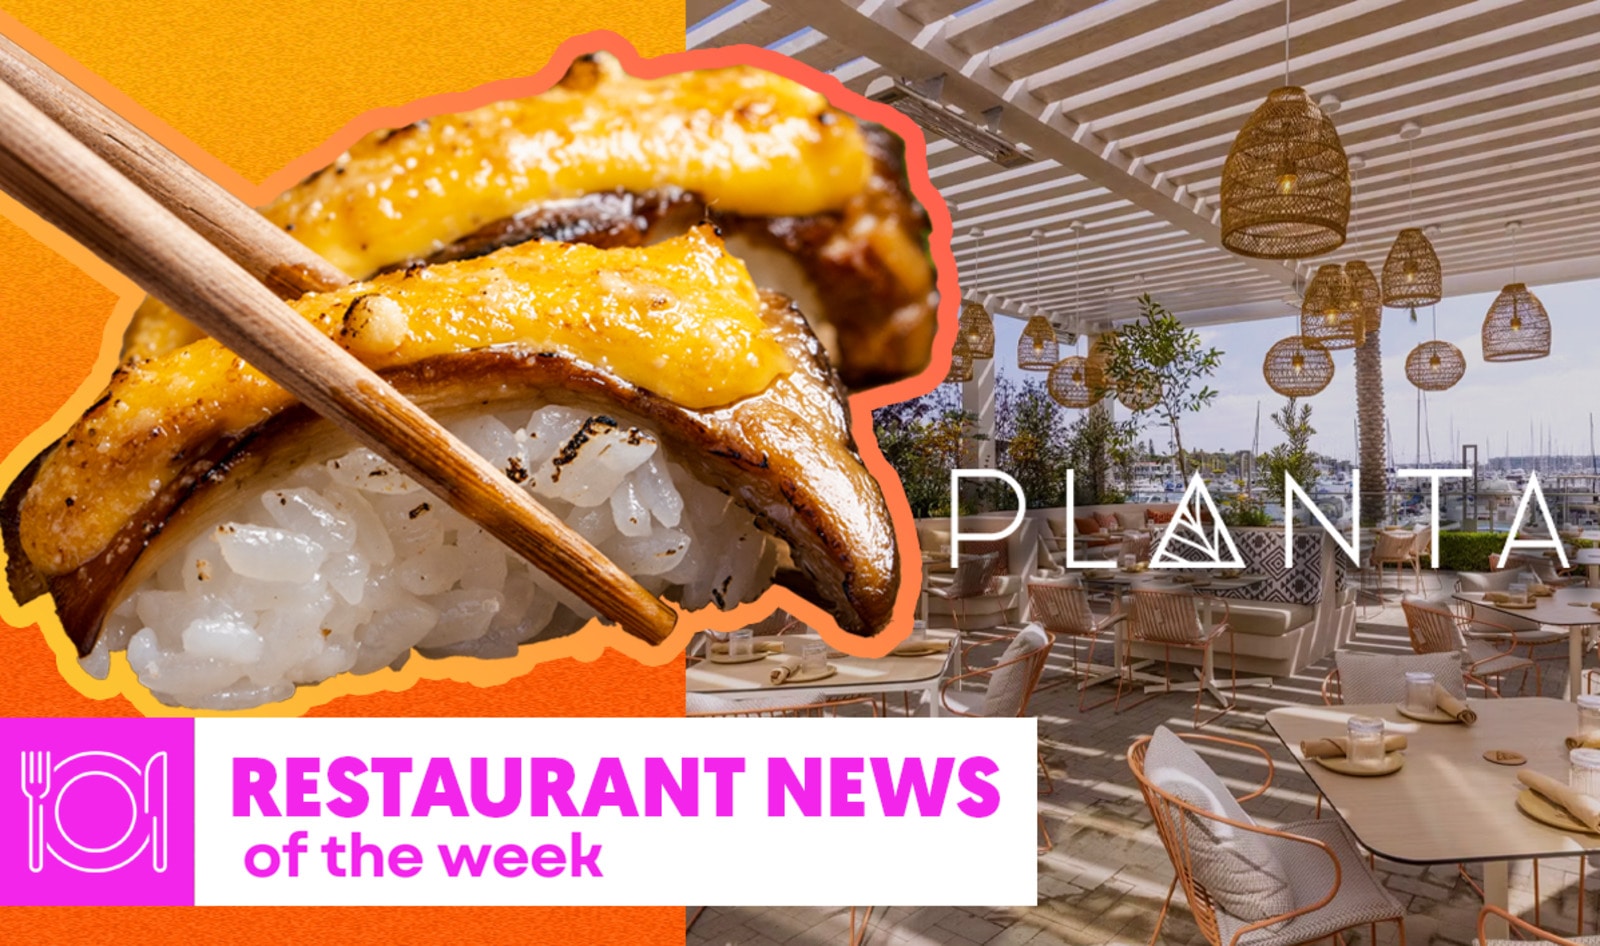 Vegan Restaurant News of the Week: LA's New Planta, Nikkei in Miami, and More